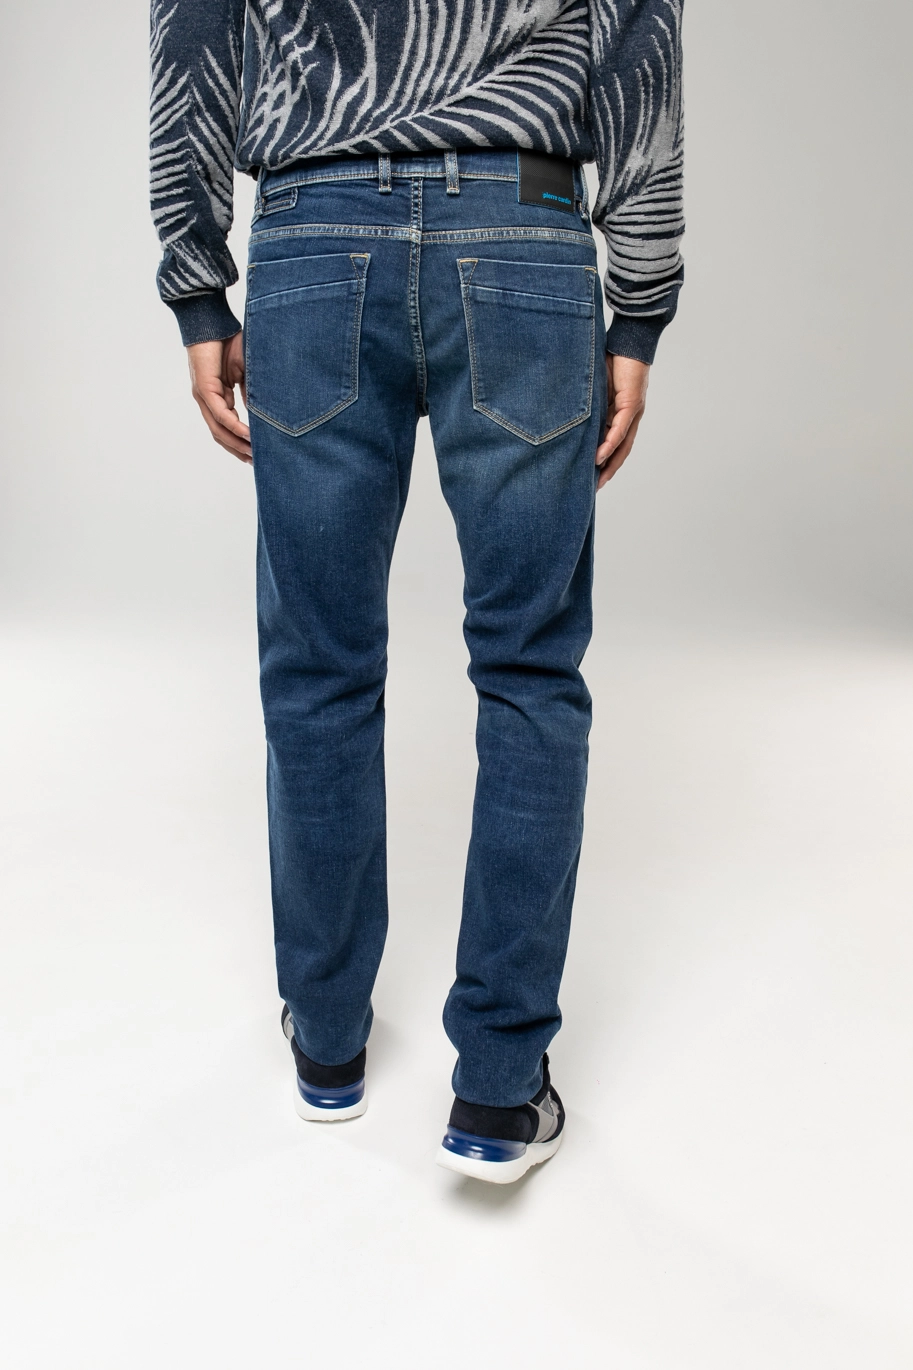 ⏩Pierre Cardin jeans from the Future Flex collection in blue Х-9914/2/3311 ᐈ Price UAH Buy in the store Pierre